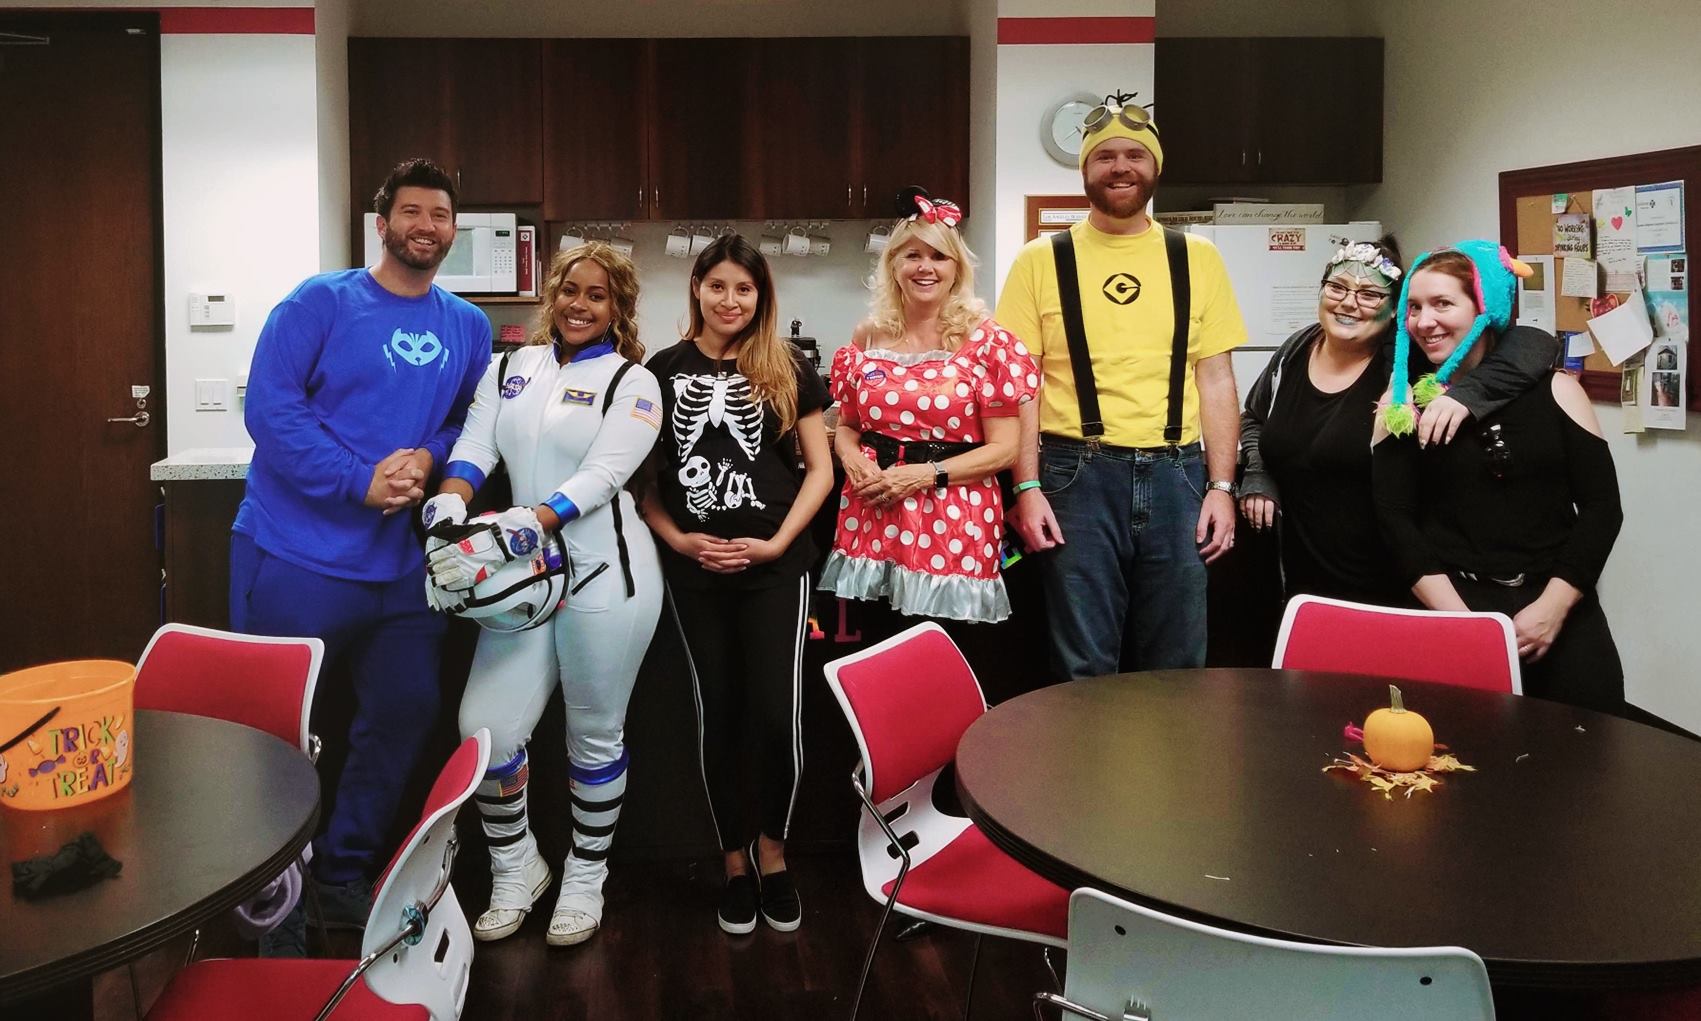 Halloween at the office